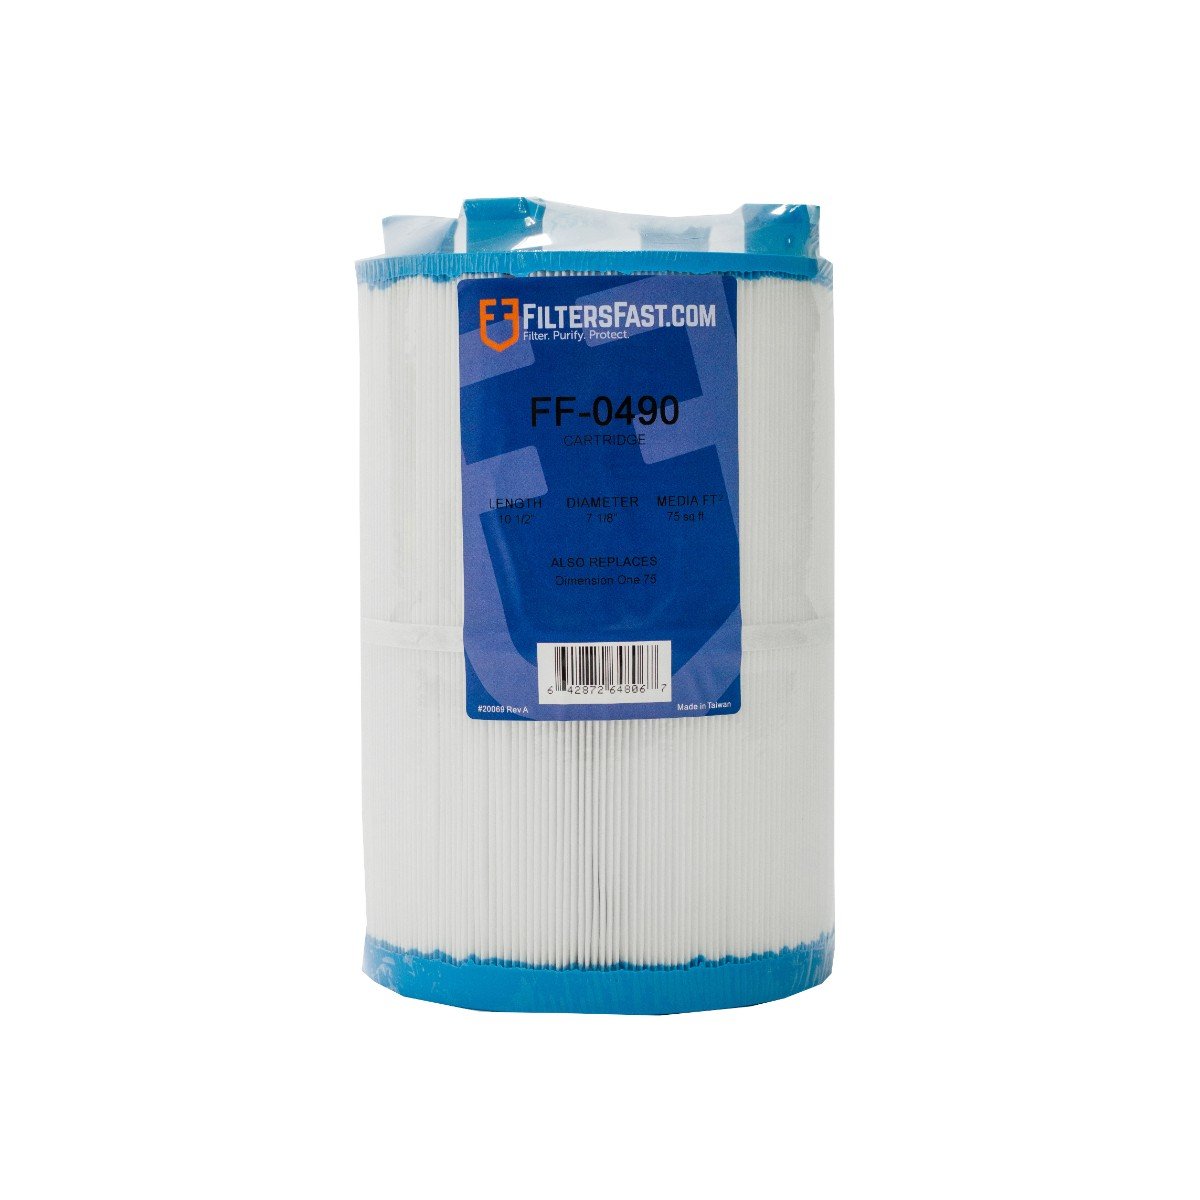 FiltersFast FF-0490 Replacement for Unicel C-7367 Pool Filter